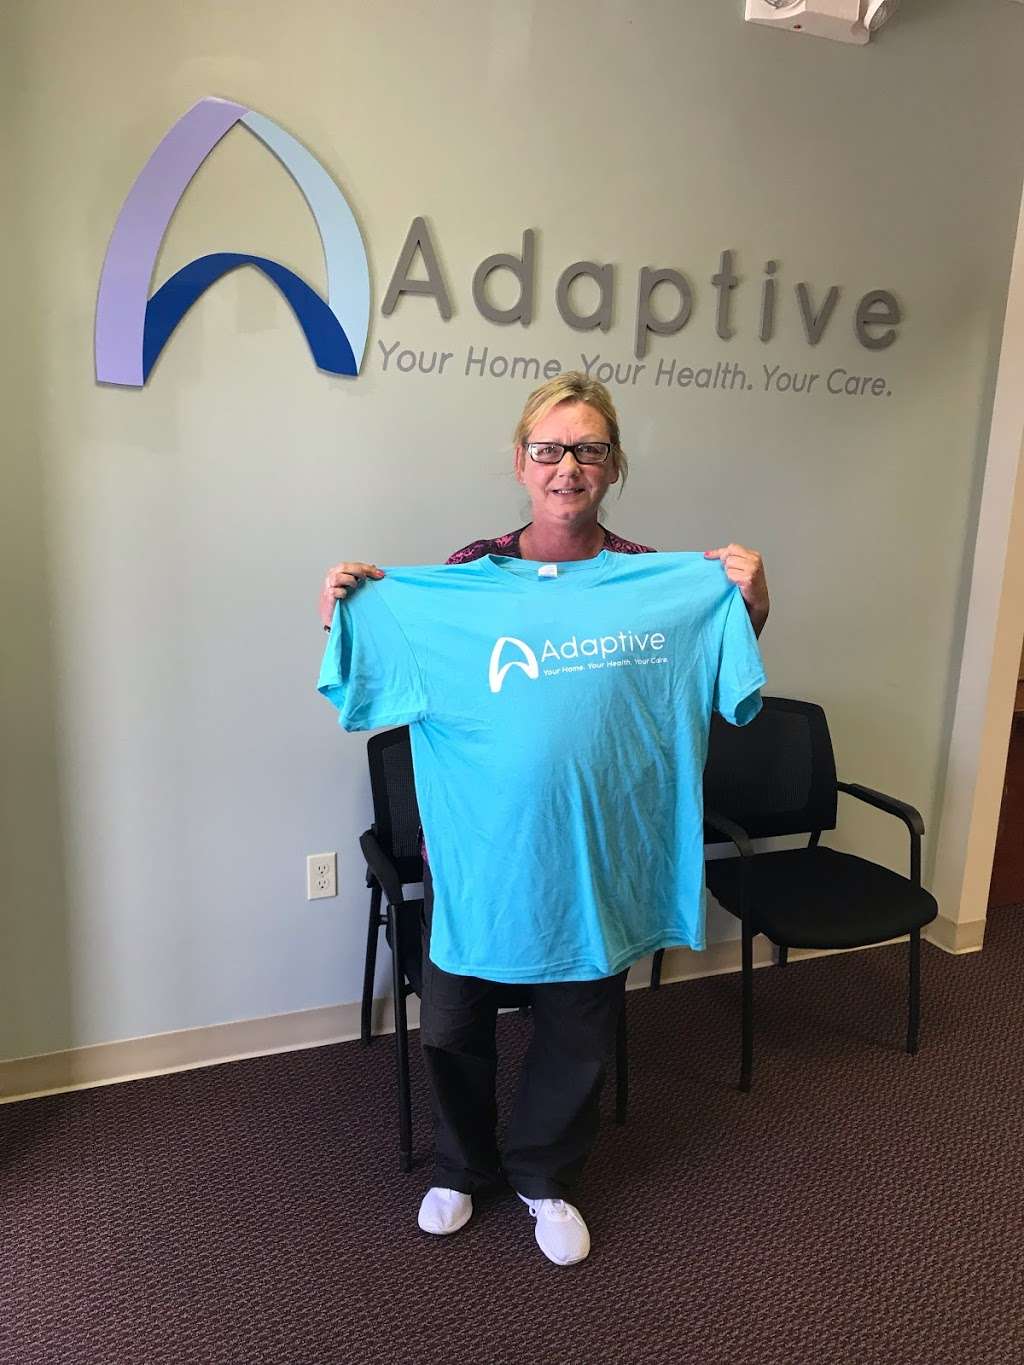 Adaptive Nursing and Healthcare Services | 2904 S Reed Rd, Kokomo, IN 46902 | Phone: (765) 450-5409